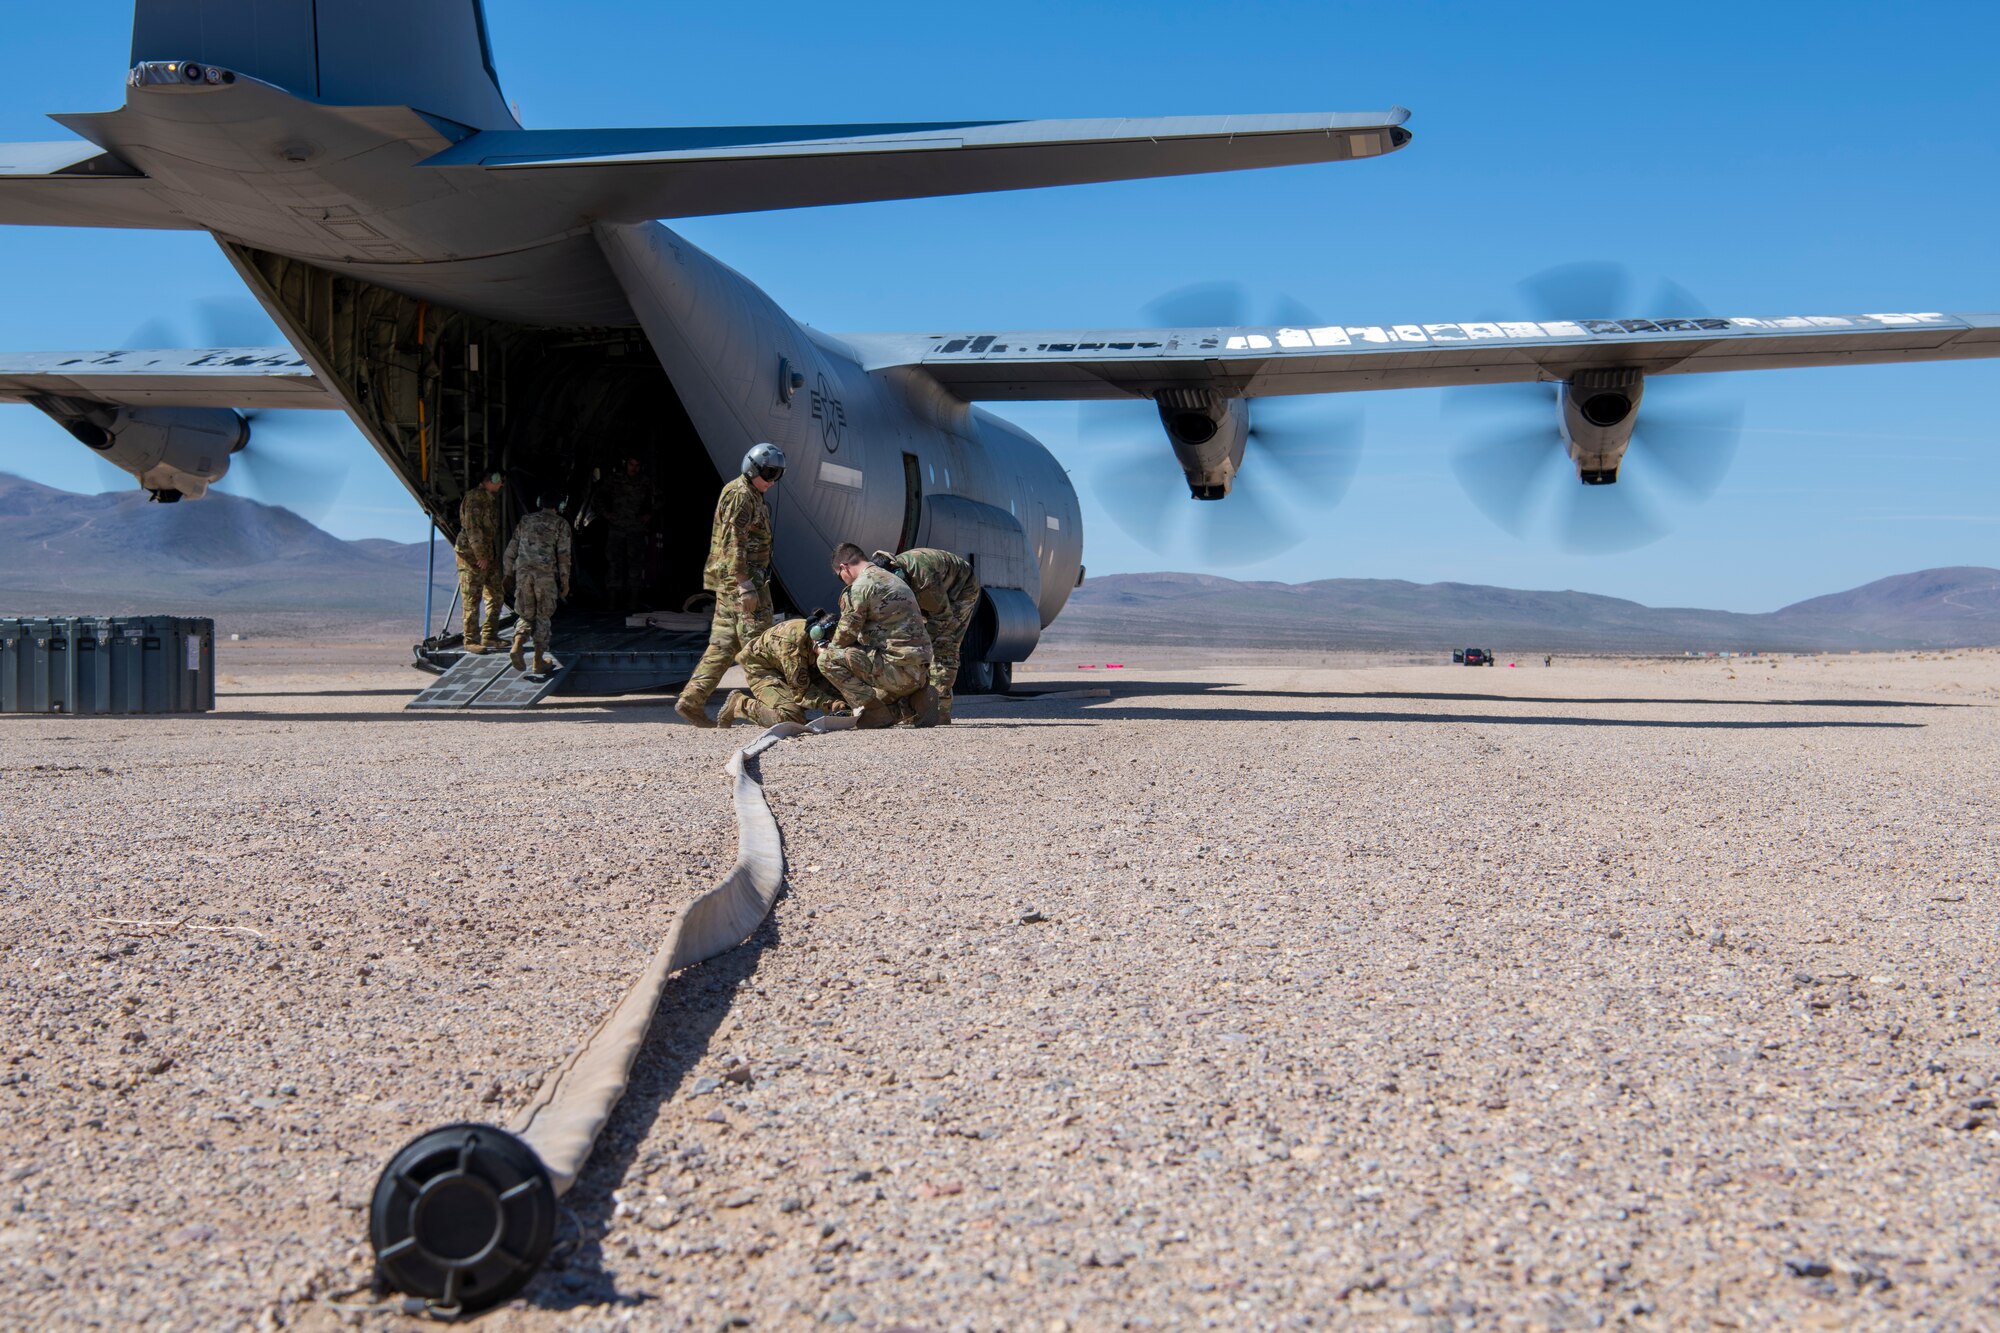 U.S. Air Force Airmen from the 317th Airlift Wing prepare a fuel hose during Operation Night King in the California desert March 26, 2023.